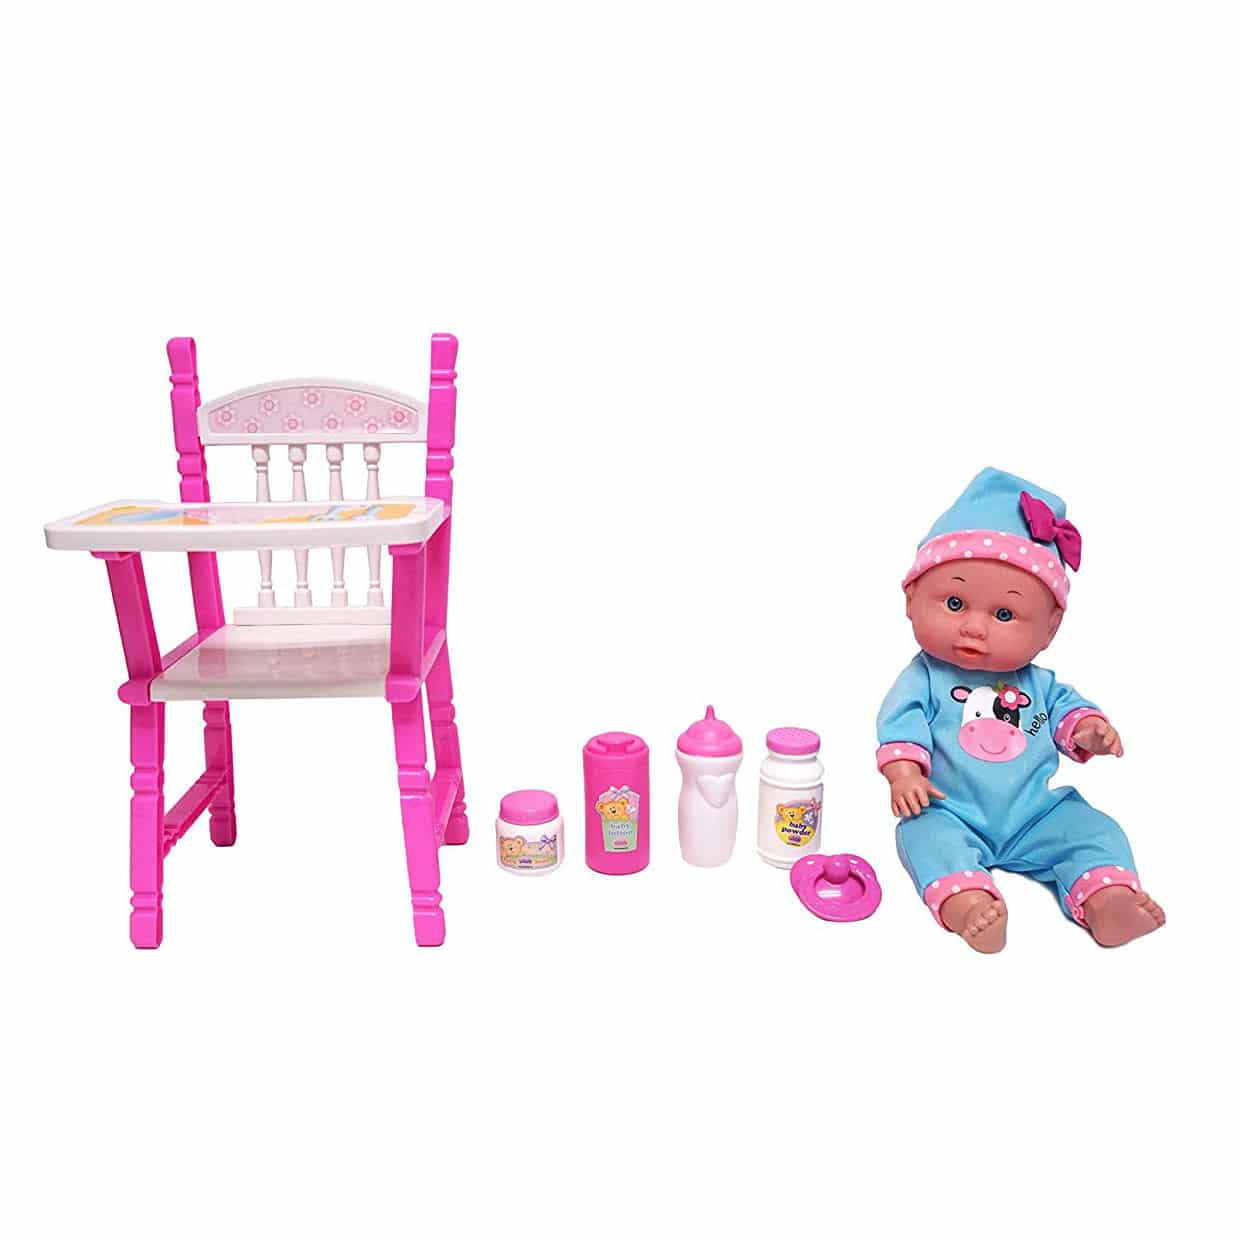 12 Baby Doll With High Chair Gift Set Samko Miko Toy Warehouse